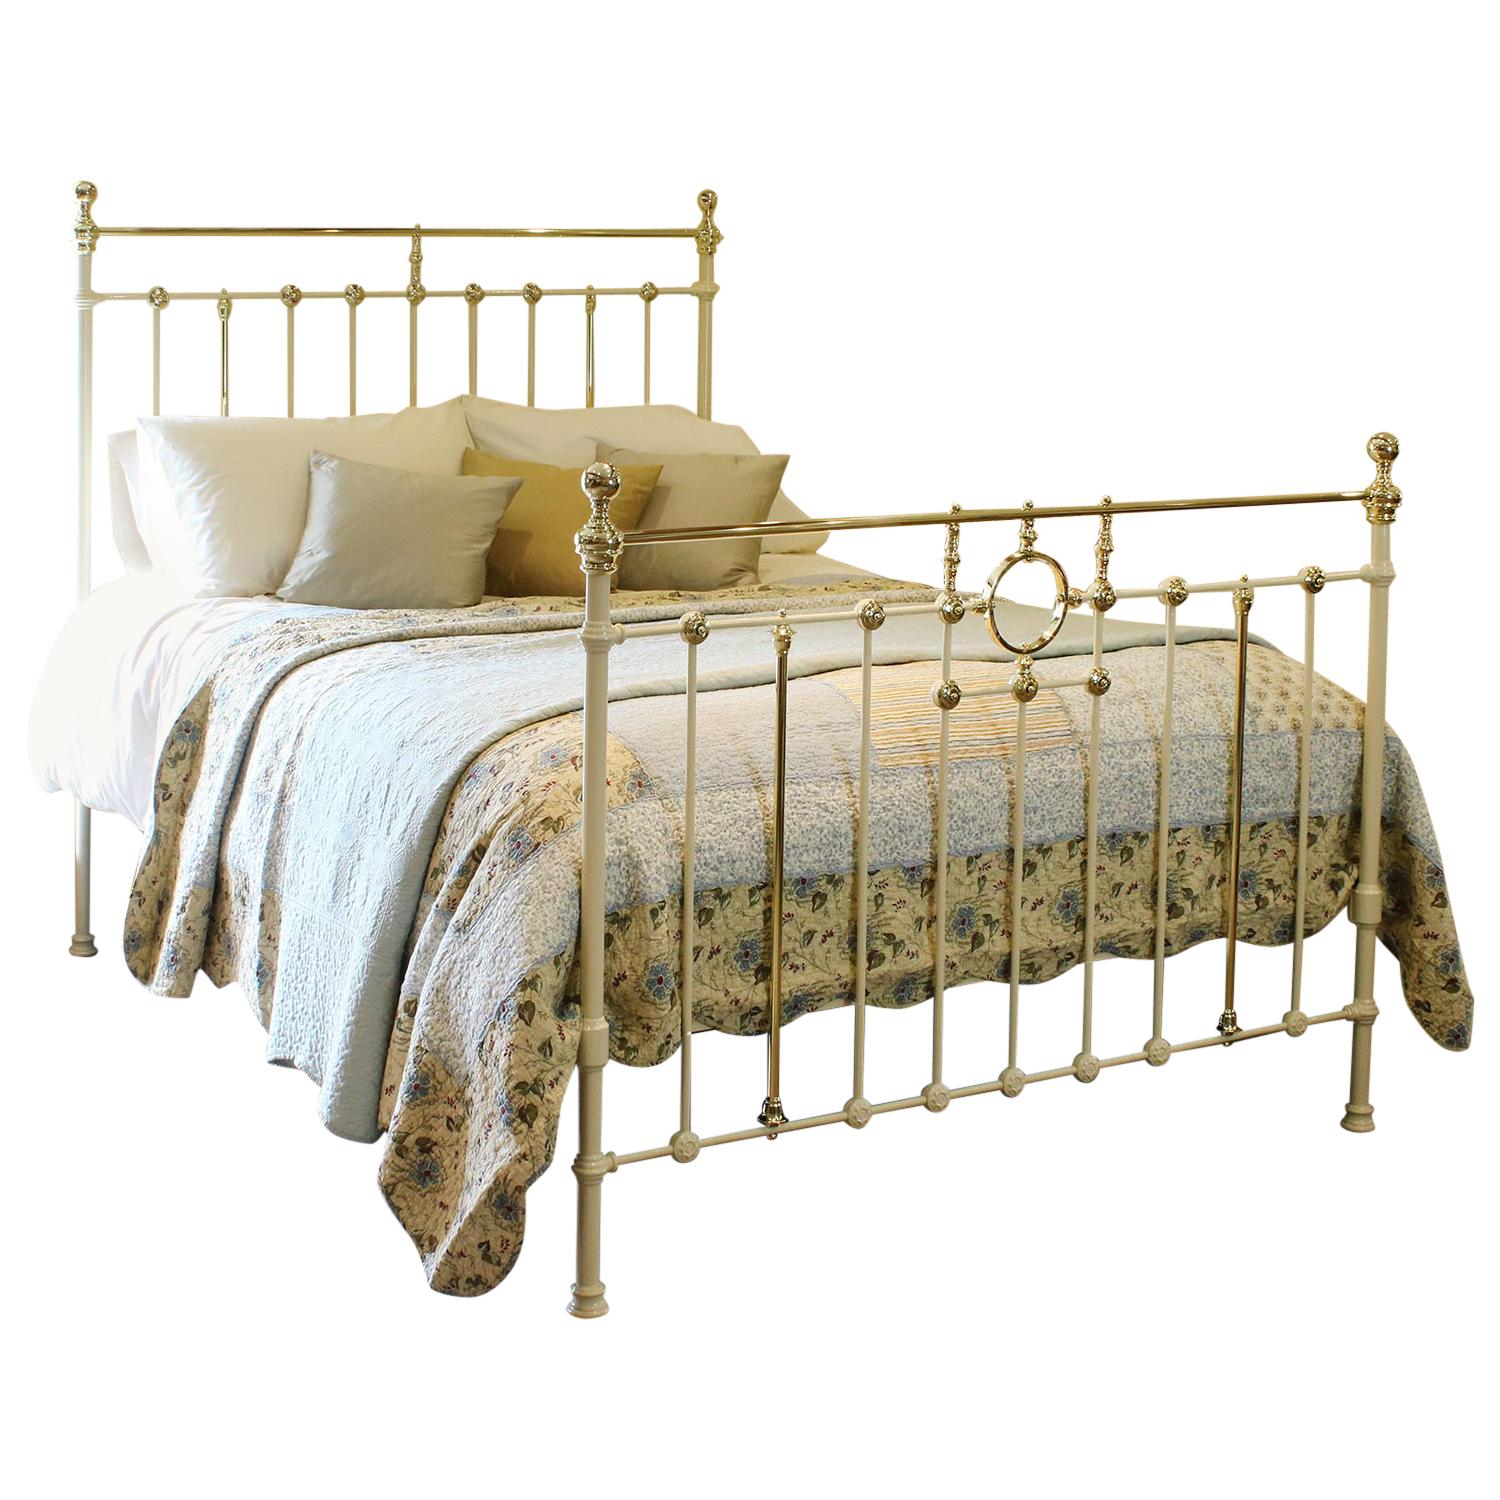 Decorative Brass and Iron Bed, MK149